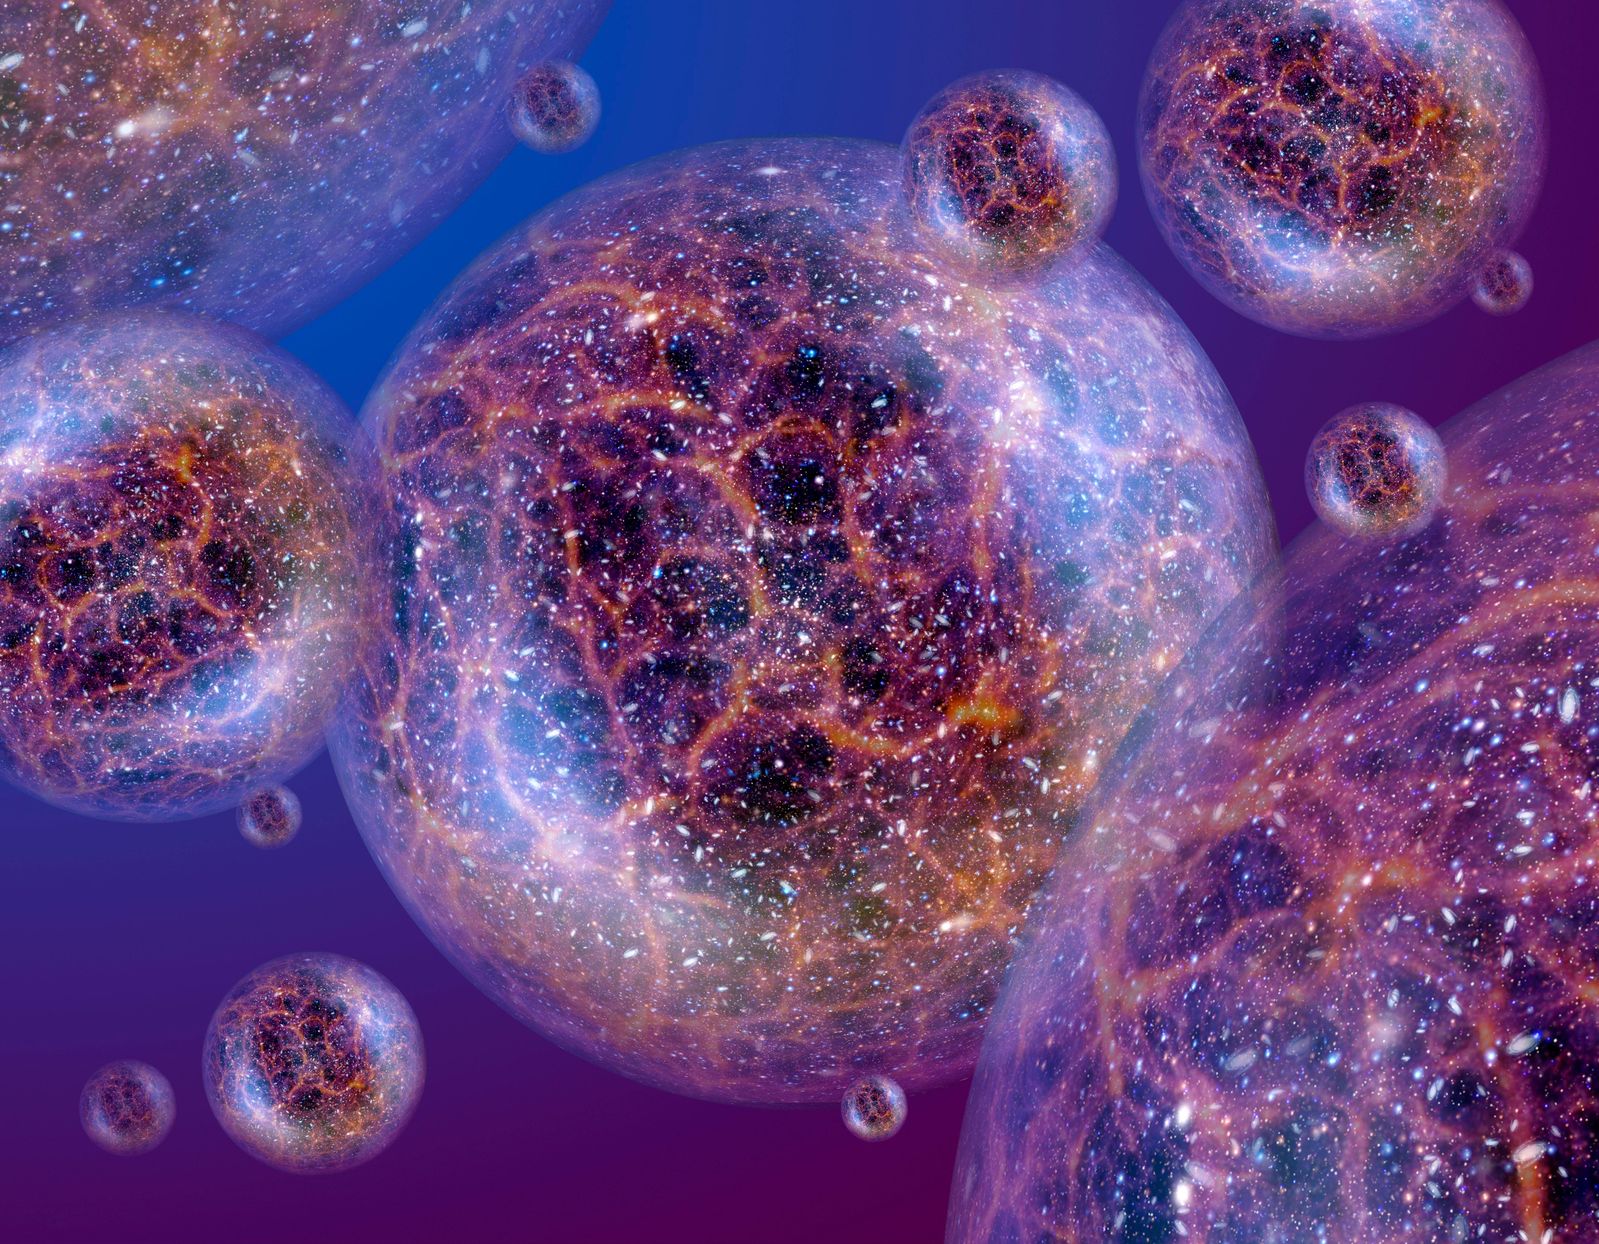 Numerous physicists entertain the idea of a multiverse, but the foundational mathematics supporting this concept may be flawed.